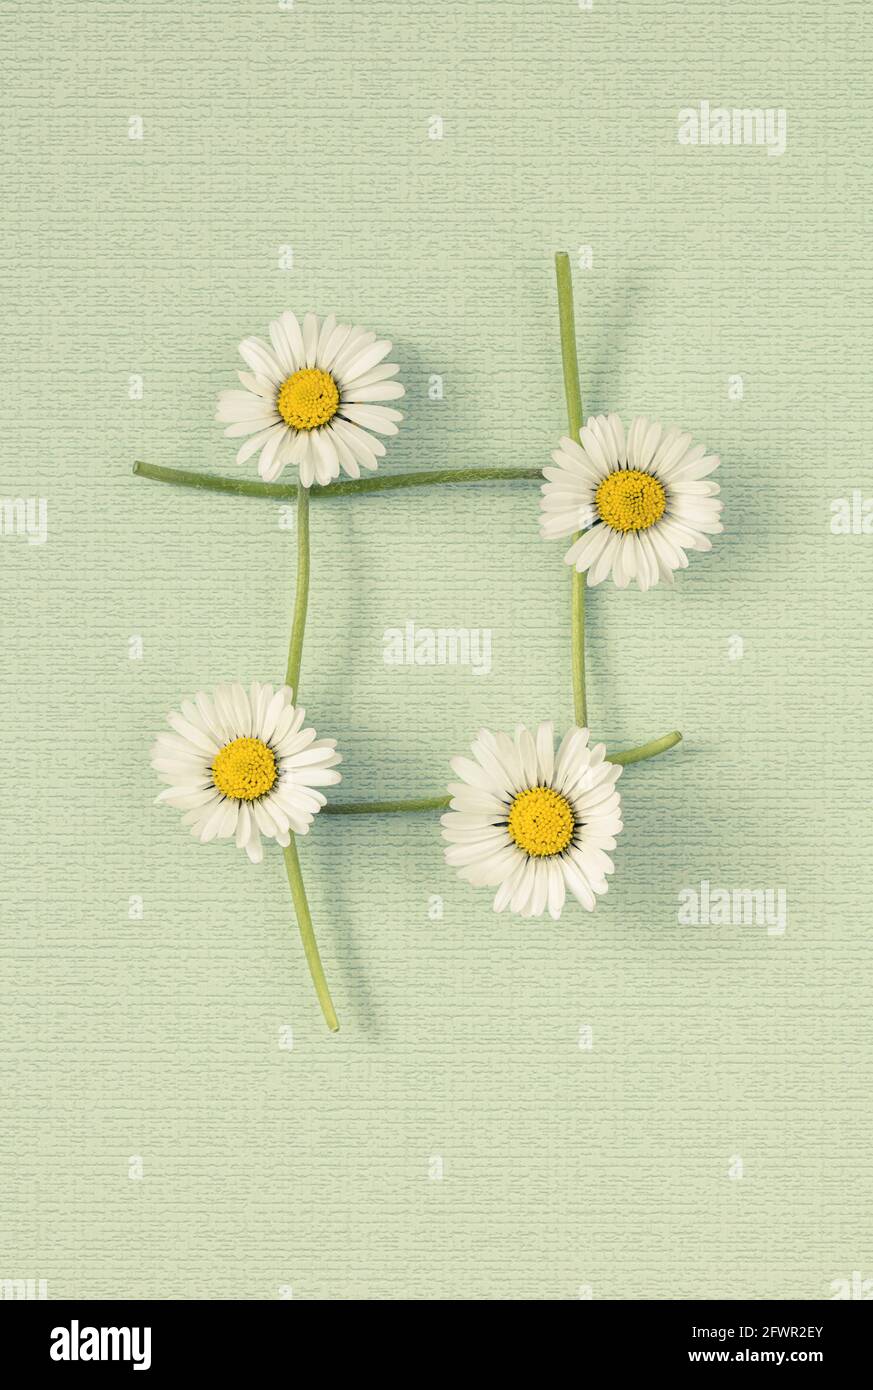 Four common Daisies joined together Stock Photo